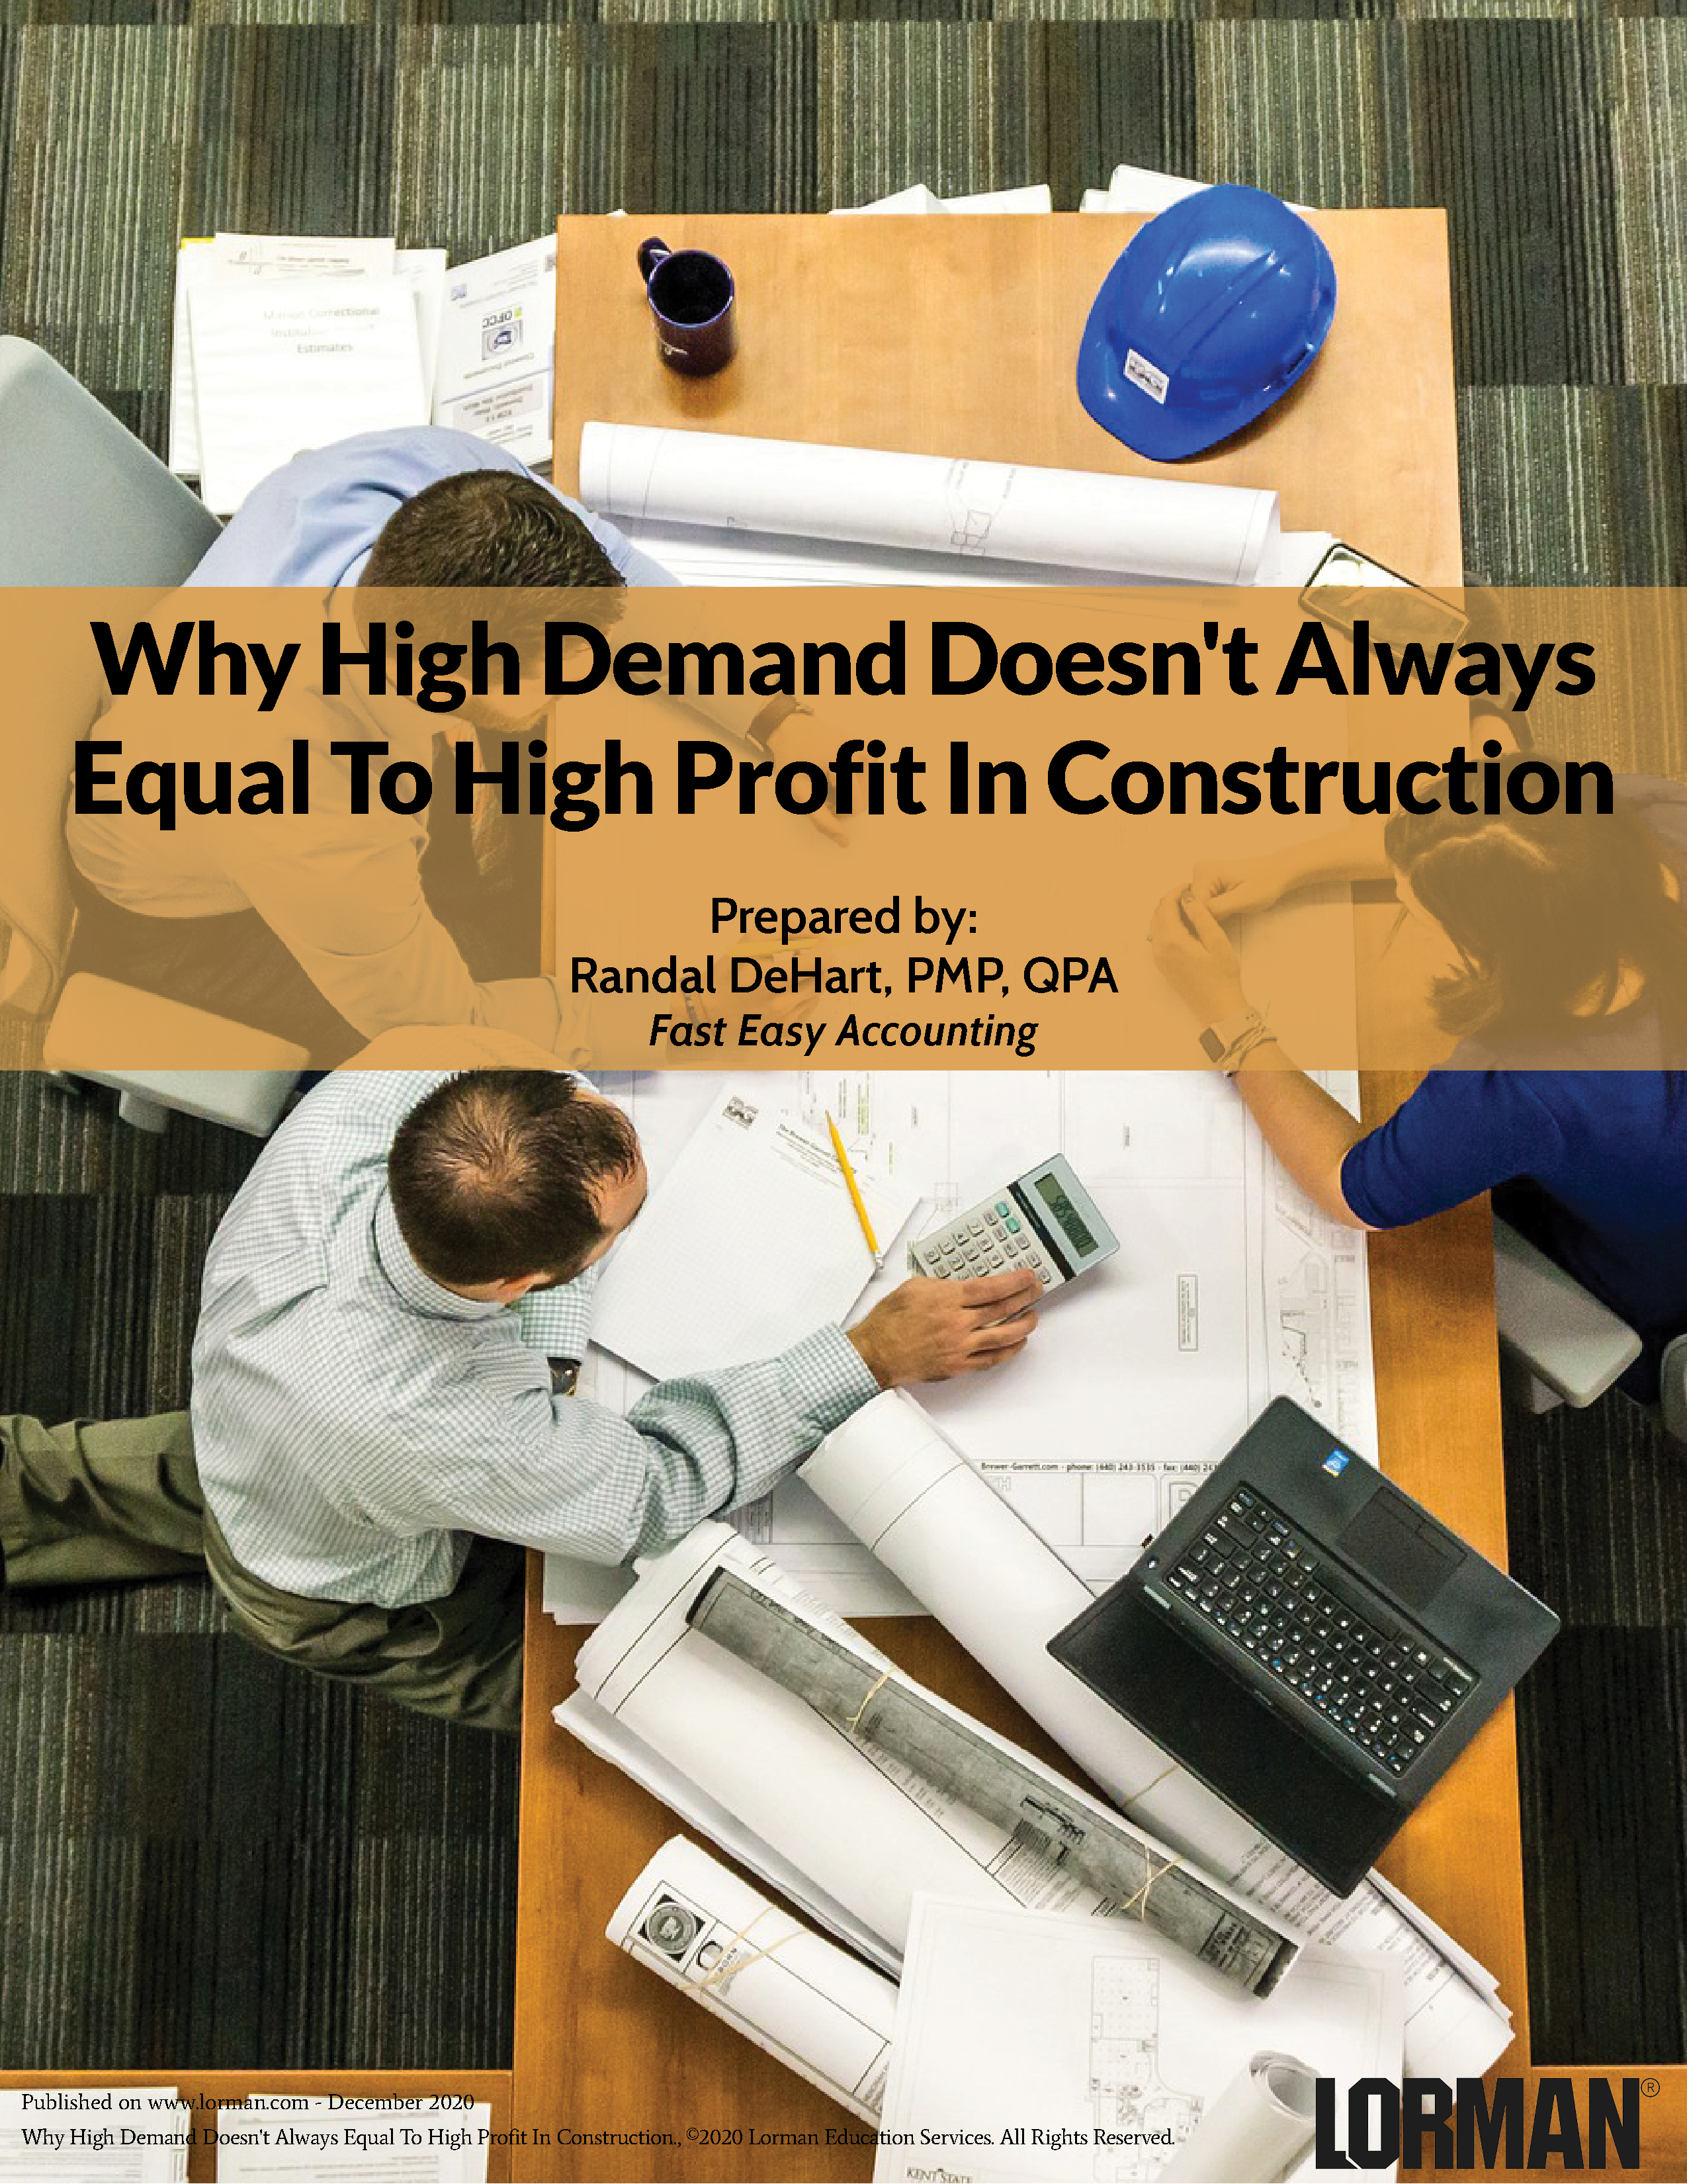 Why High Demand Doesn't Always Equal To High Profit In Construction